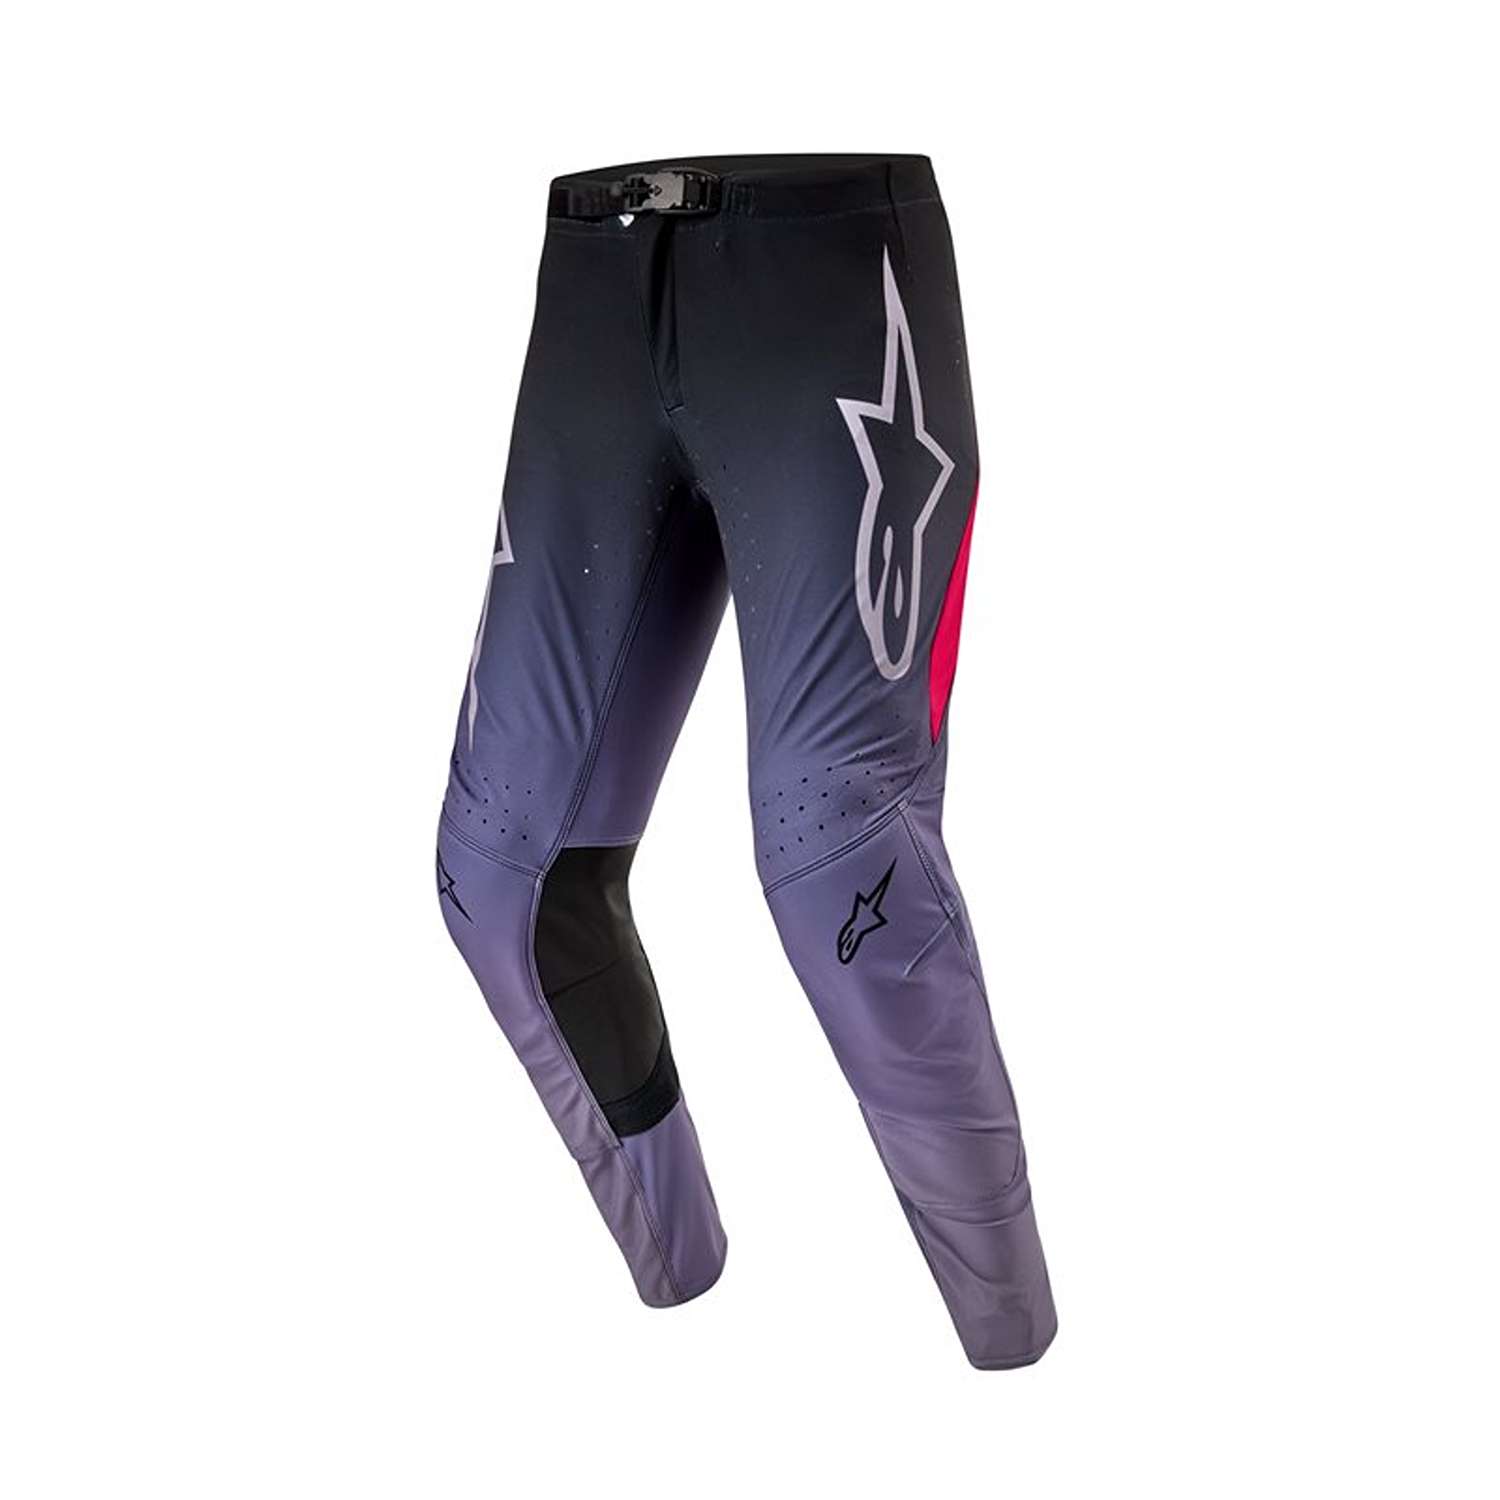 Image of EU Alpinestars Supertech Dade Pants Iron Red Berry Taille 38